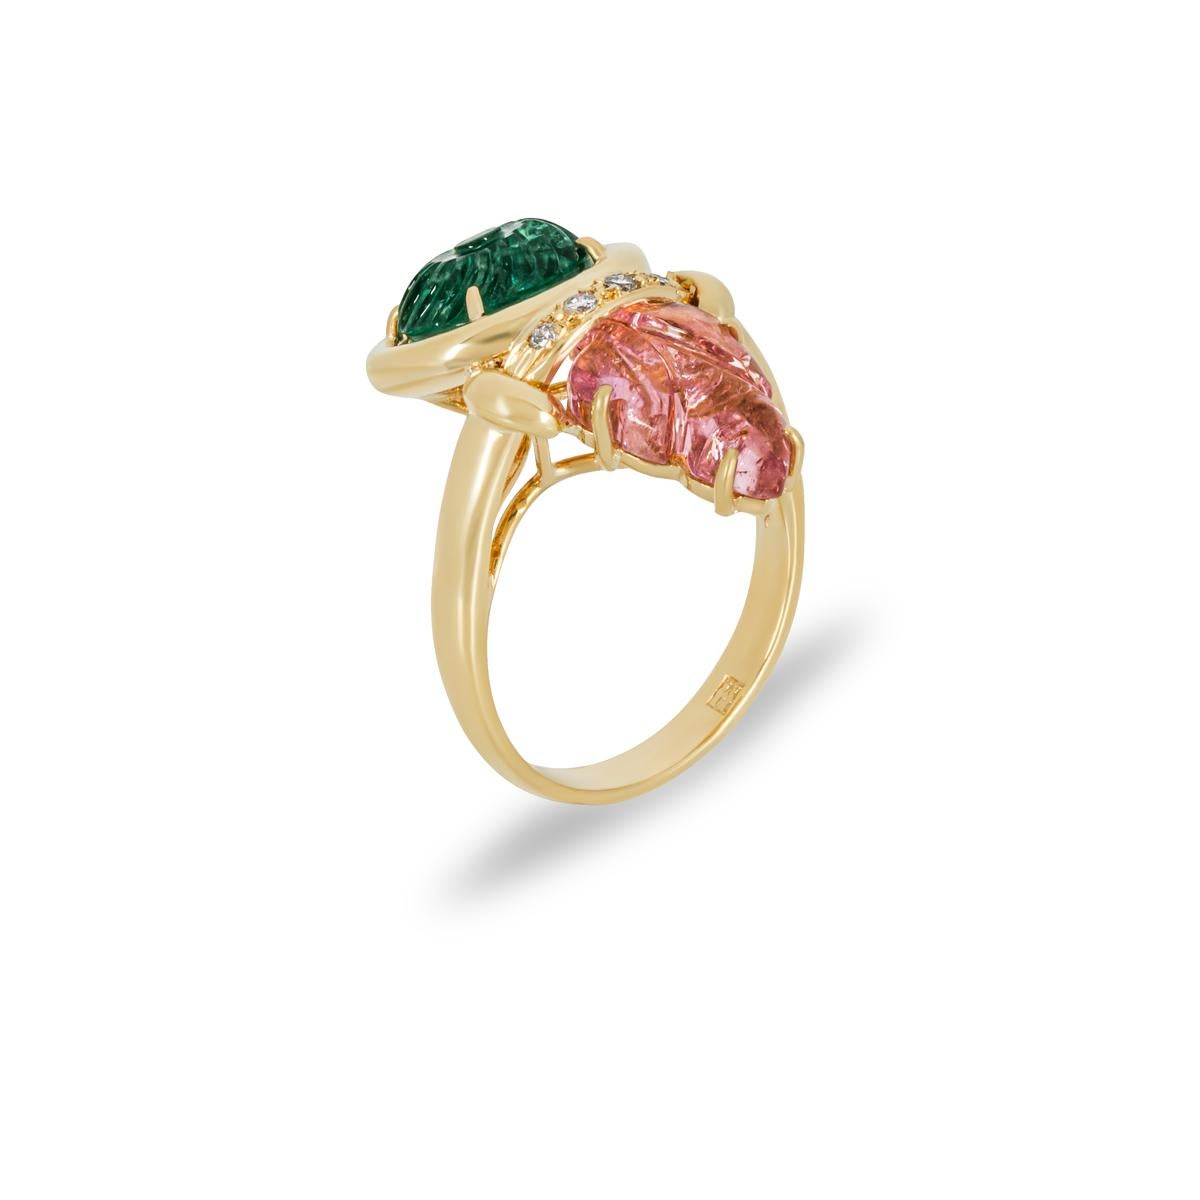 An intricate 18k yellow gold multi-gemstone and diamond ring. The dress ring consists of an oval cut carved emerald displaying a dark green hue, a floral cut pink tourmaline displaying a peachy-pink hue and 4 diamonds. The 4 round brilliant cut